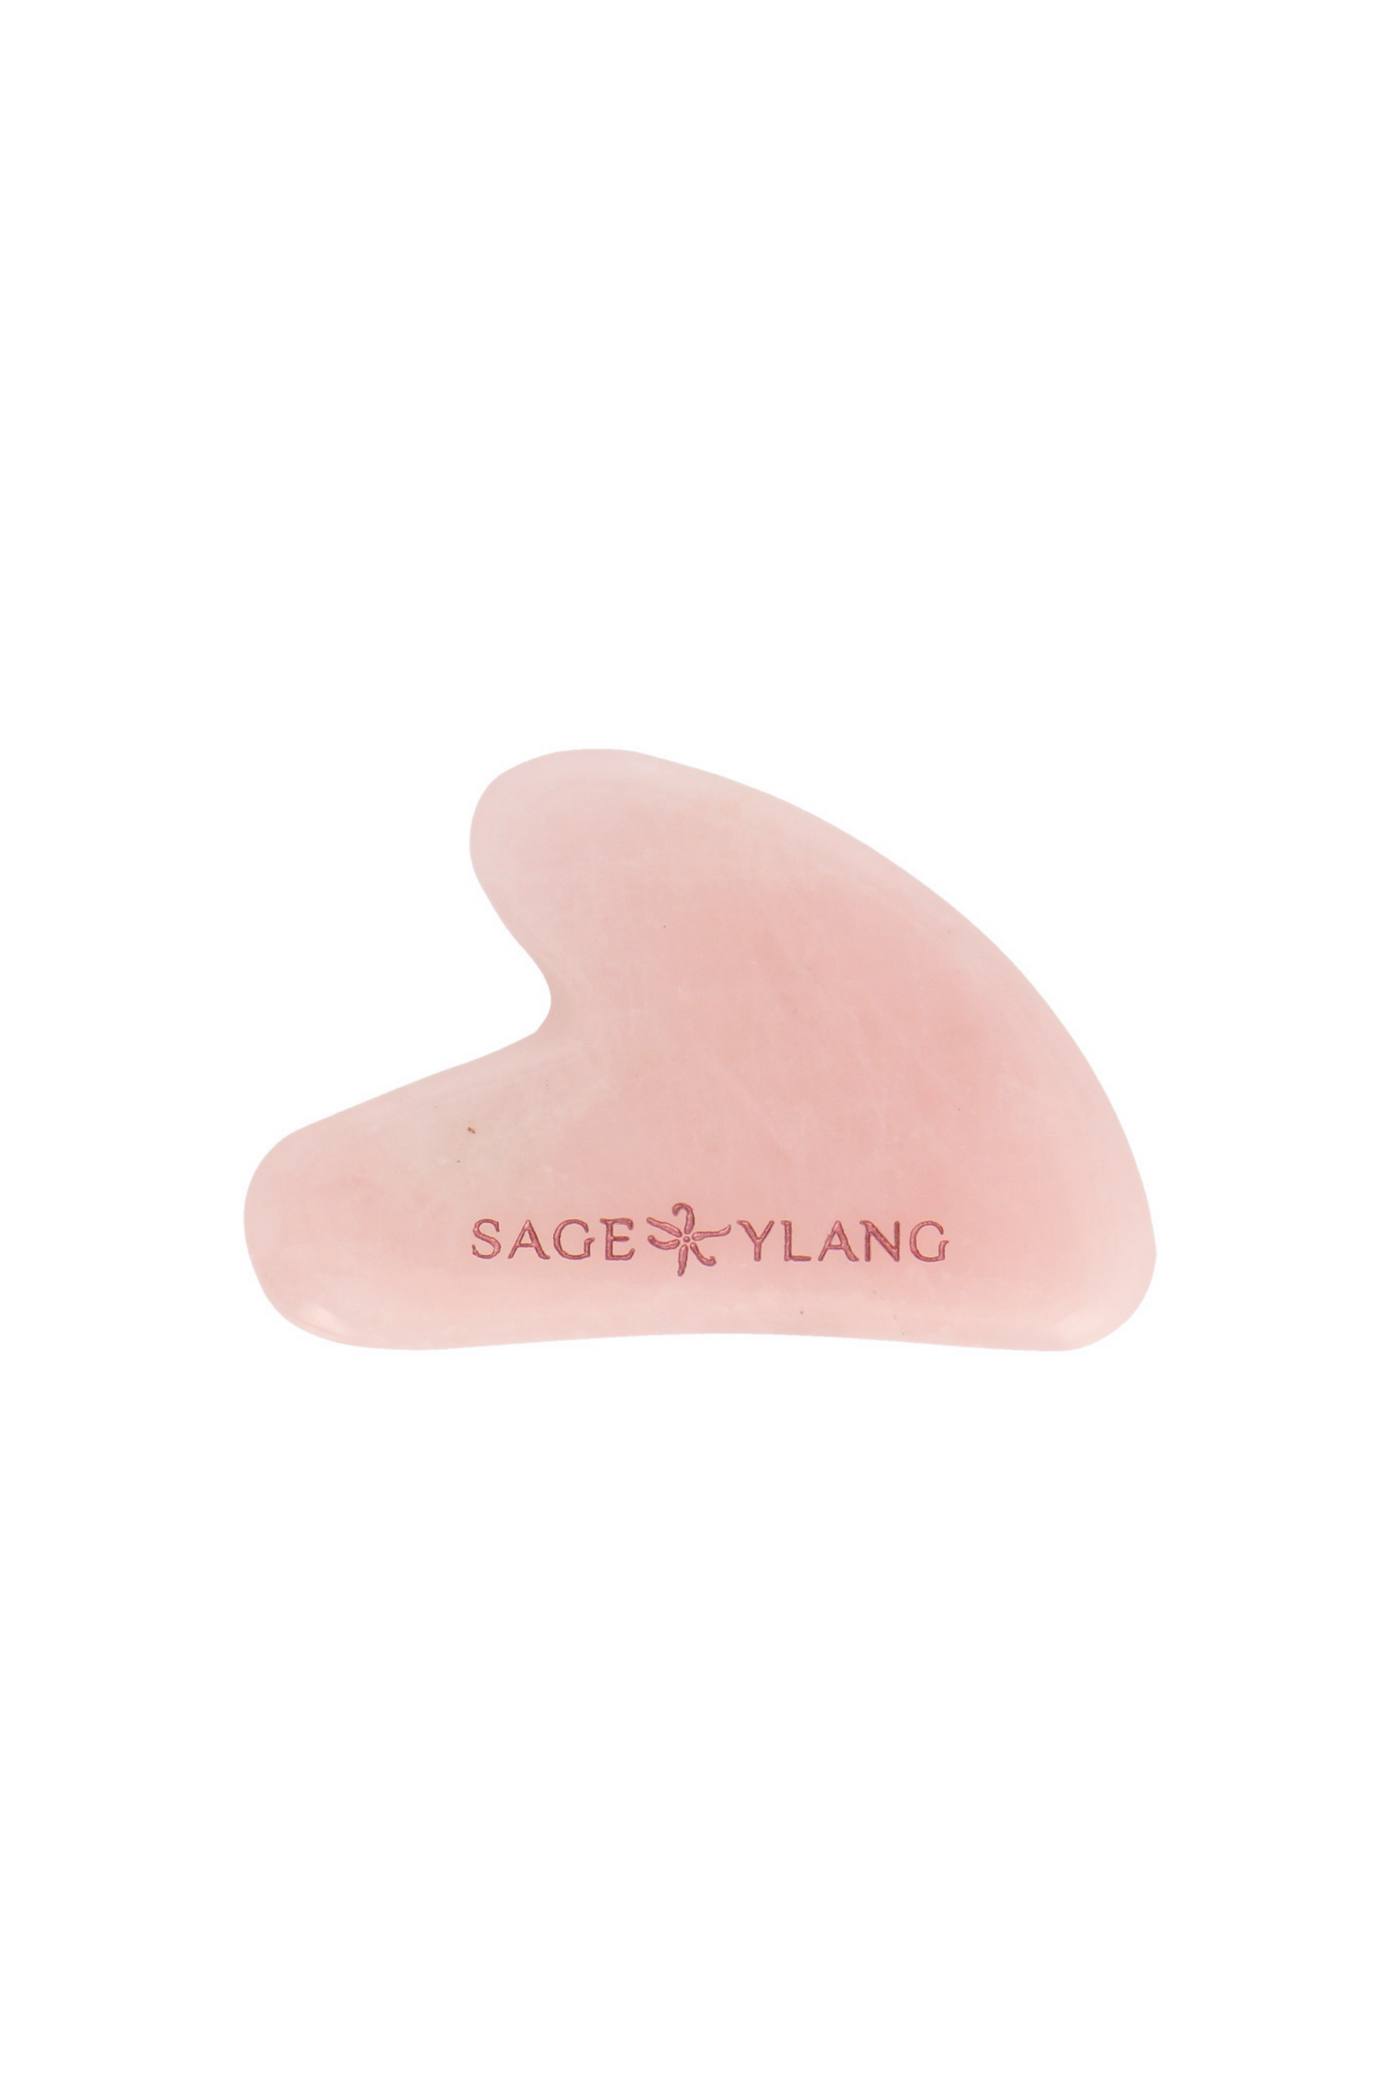 Sage & Ylang Rose Quartz Gua Sha, available on ZERRIN with free Singapore shipping above $50